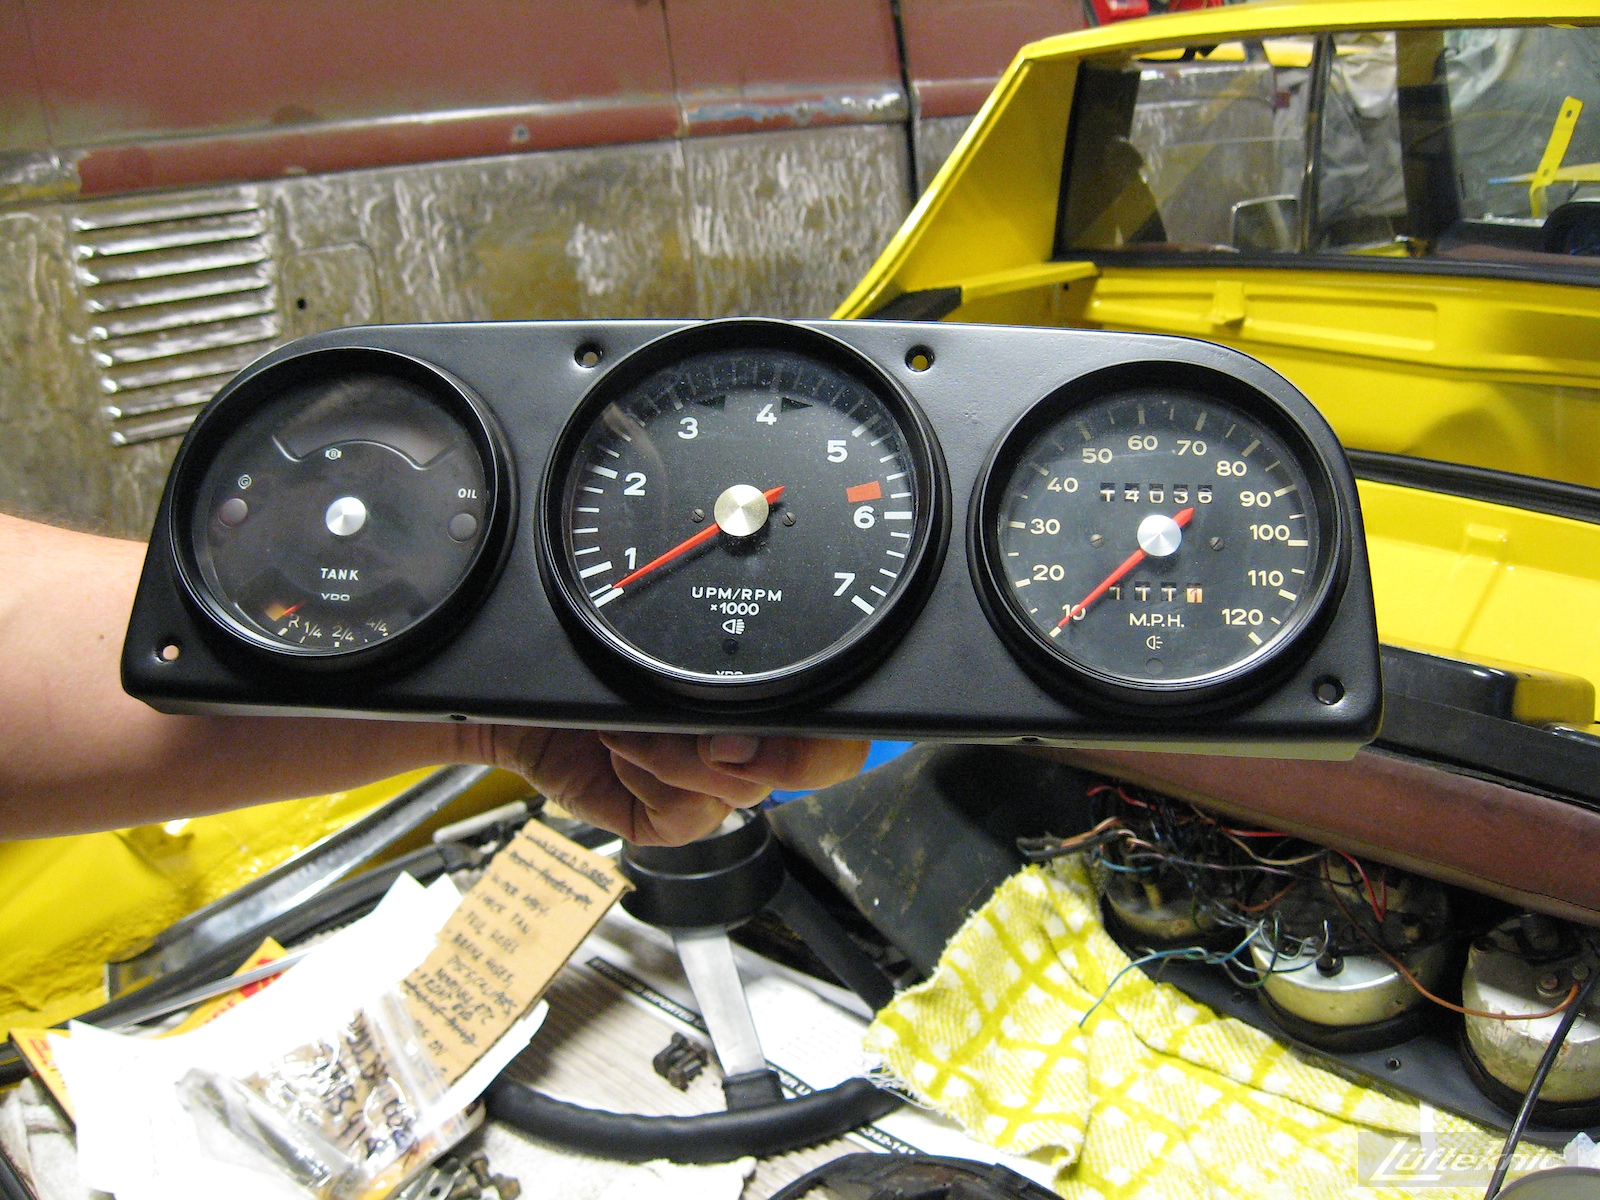 Dashboard and gauges shown for a restored yellow Porsche 914 at Lufteknic.